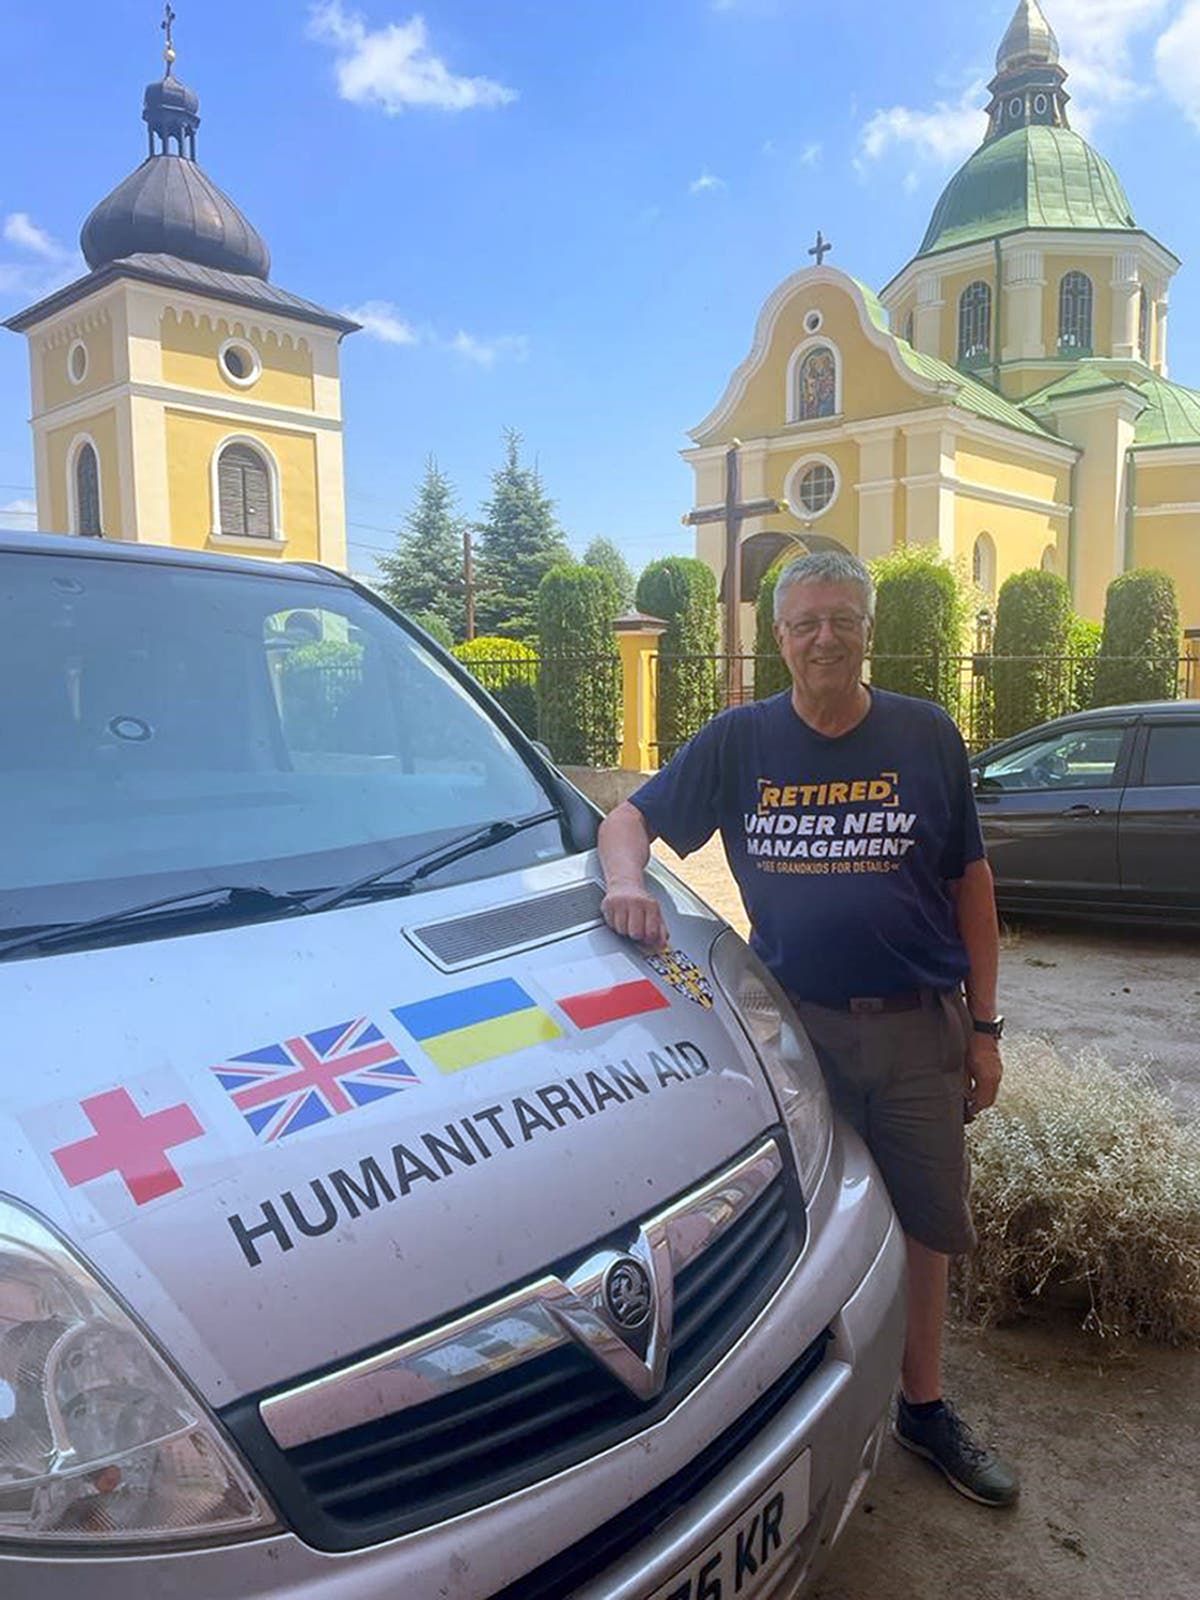 British grandad delivers aid to Ukraine and urges the public to keep donating